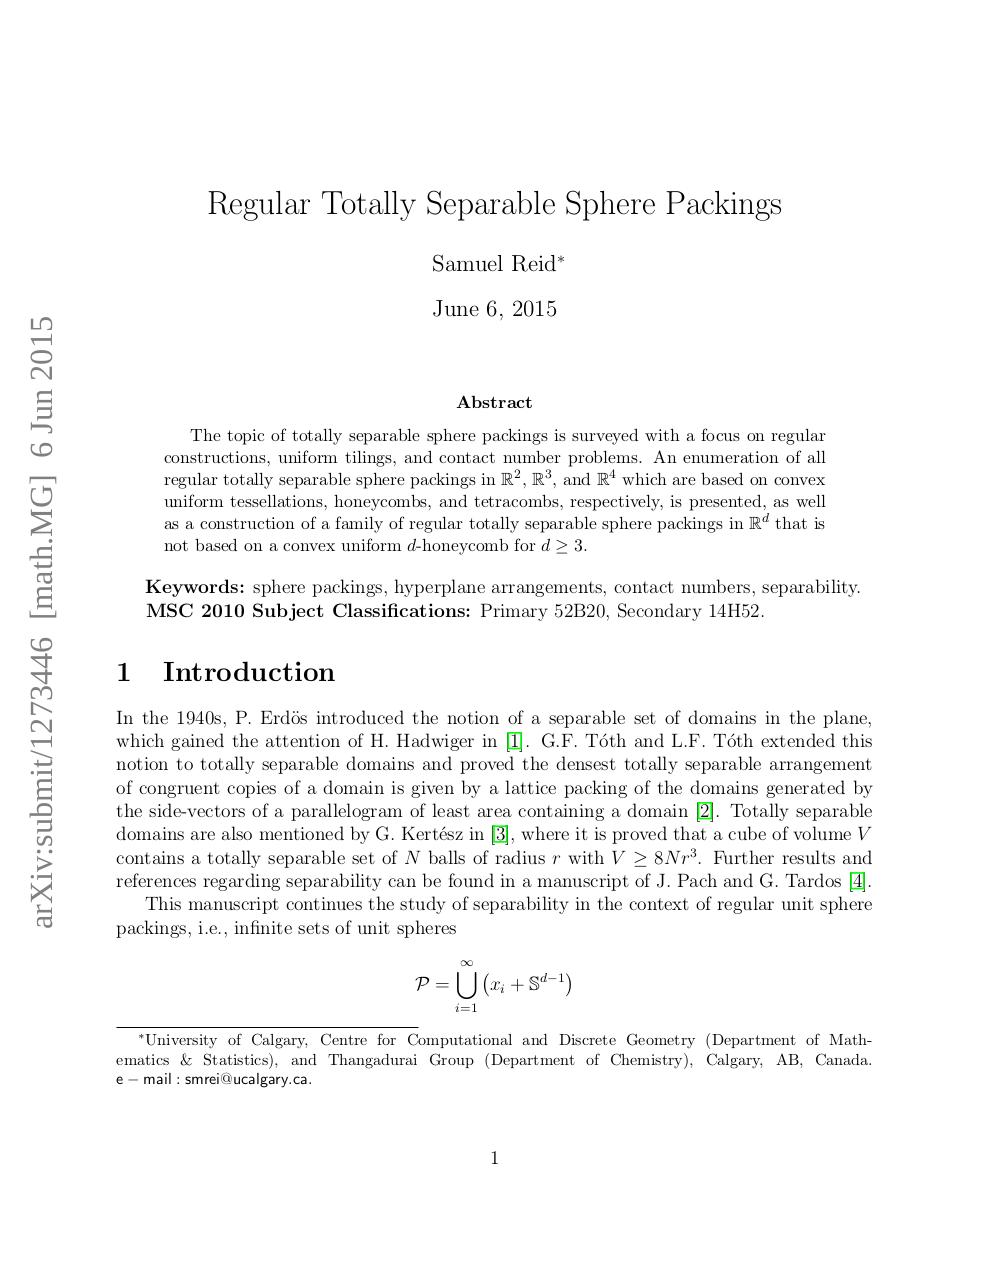 Regular Totally Separable Sphere Packings arXiv.pdf - page 1/10